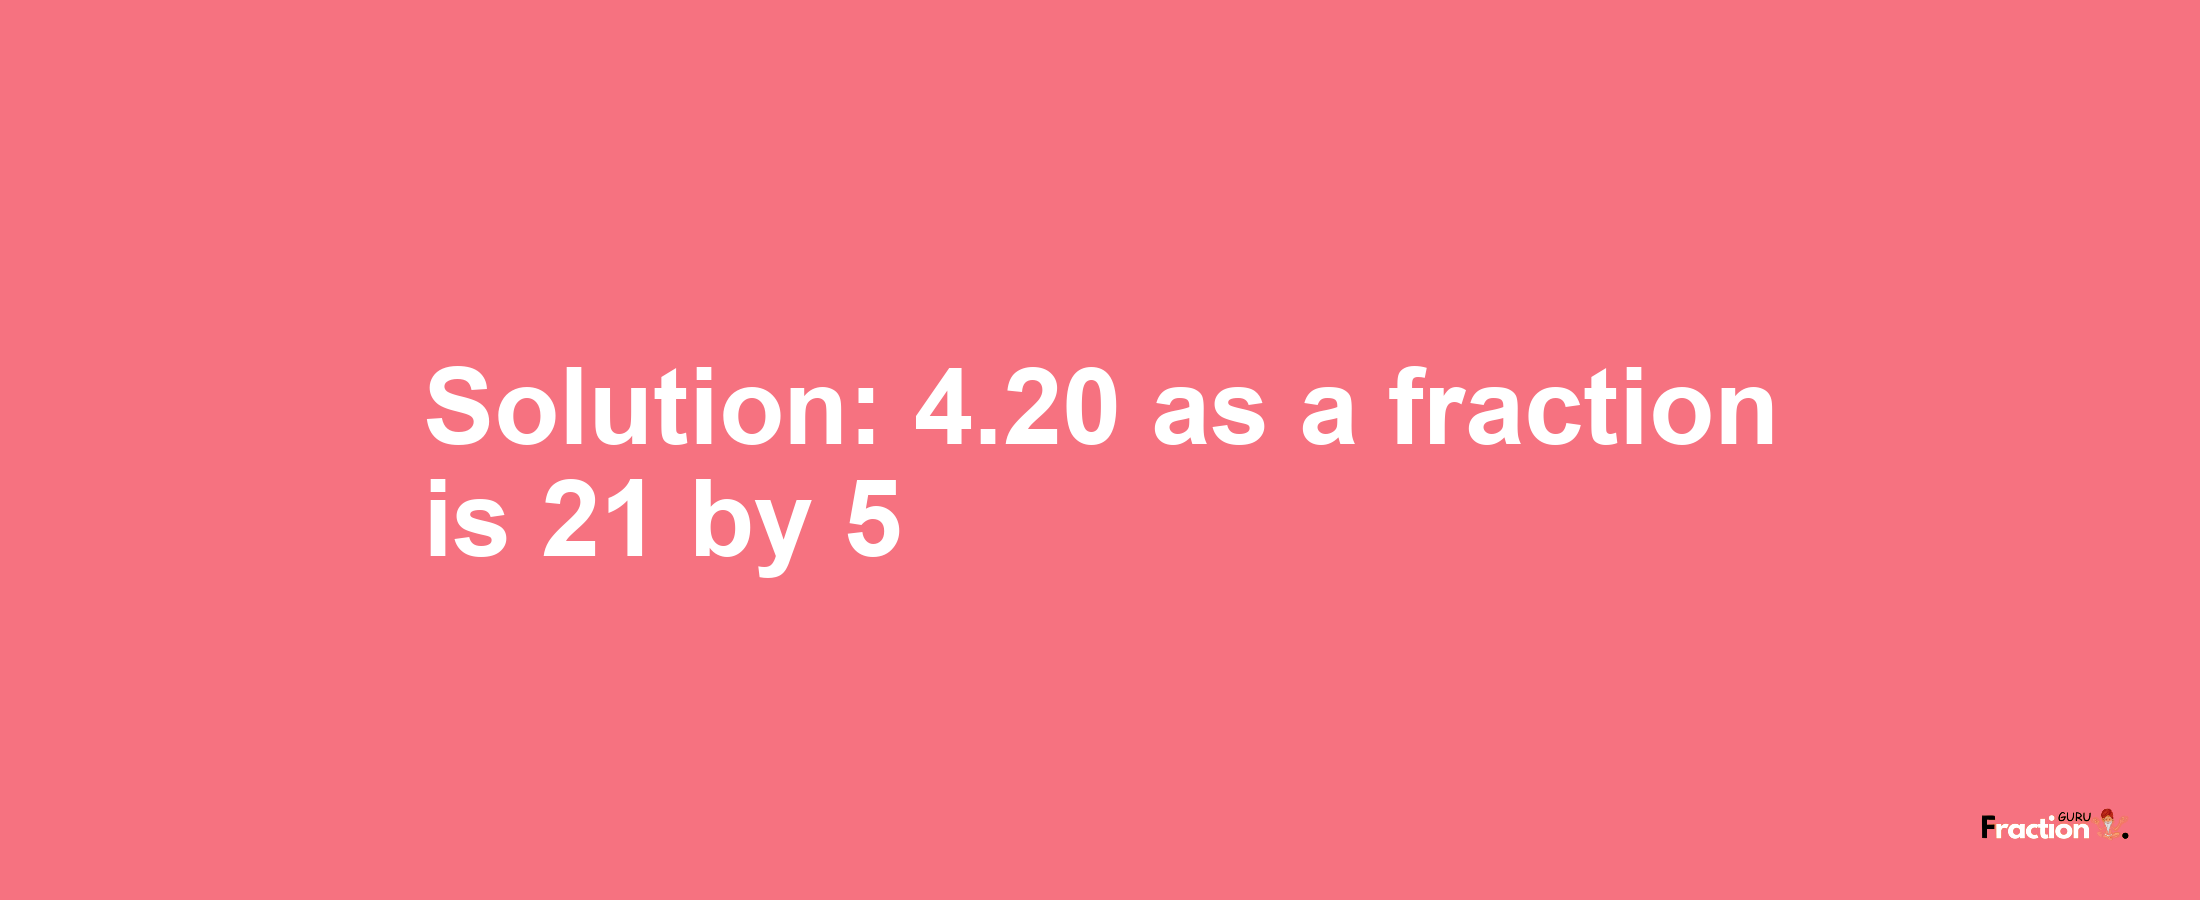 Solution:4.20 as a fraction is 21/5